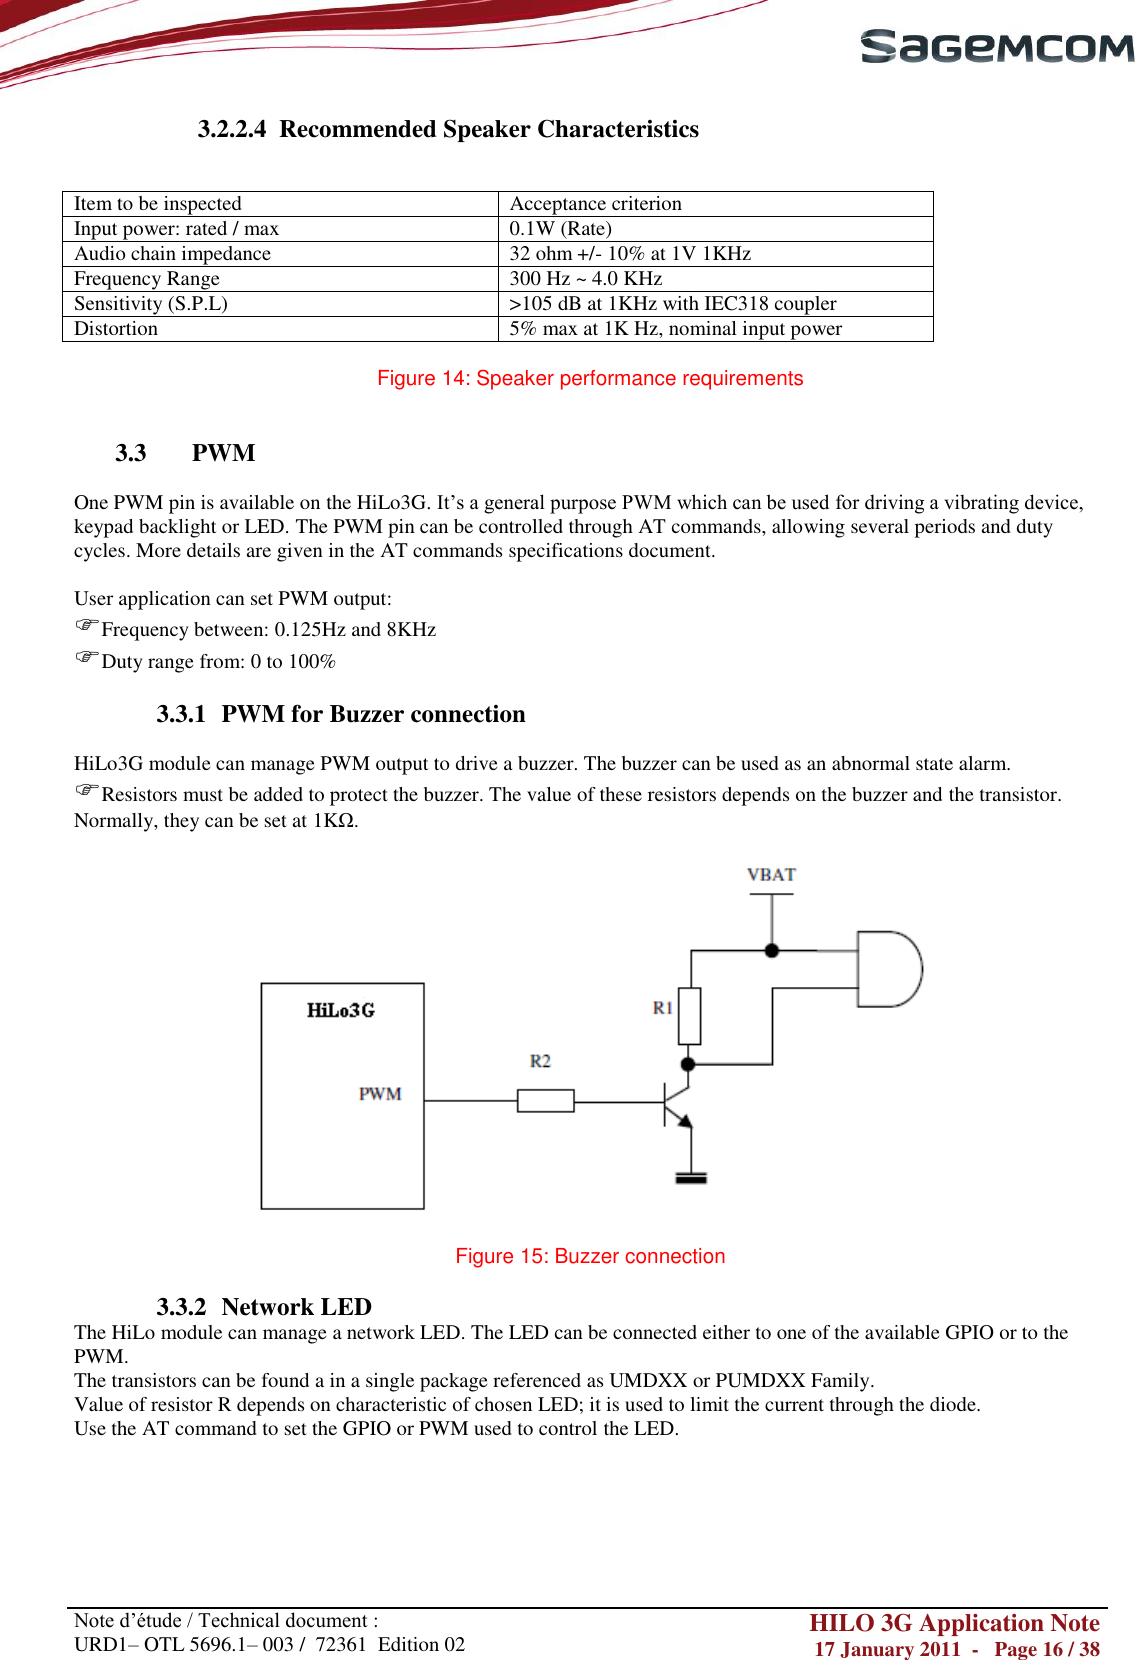       Note d‘étude / Technical document : URD1– OTL 5696.1– 003 /  72361  Edition 02 HILO 3G Application Note 17 January 2011  -   Page 16 / 38    3.2.2.4  Recommended Speaker Characteristics   Item to be inspected Acceptance criterion Input power: rated / max 0.1W (Rate) Audio chain impedance 32 ohm +/- 10% at 1V 1KHz Frequency Range 300 Hz ~ 4.0 KHz Sensitivity (S.P.L) &gt;105 dB at 1KHz with IEC318 coupler Distortion 5% max at 1K Hz, nominal input power  Figure 14: Speaker performance requirements   3.3 PWM  One PWM pin is available on the HiLo3G. It‘s a general purpose PWM which can be used for driving a vibrating device, keypad backlight or LED. The PWM pin can be controlled through AT commands, allowing several periods and duty cycles. More details are given in the AT commands specifications document.  User application can set PWM output:  Frequency between: 0.125Hz and 8KHz  Duty range from: 0 to 100%  3.3.1 PWM for Buzzer connection  HiLo3G module can manage PWM output to drive a buzzer. The buzzer can be used as an abnormal state alarm. Resistors must be added to protect the buzzer. The value of these resistors depends on the buzzer and the transistor. Normally, they can be set at 1KΩ.                                  Figure 15: Buzzer connection  3.3.2 Network LED The HiLo module can manage a network LED. The LED can be connected either to one of the available GPIO or to the PWM.  The transistors can be found a in a single package referenced as UMDXX or PUMDXX Family.  Value of resistor R depends on characteristic of chosen LED; it is used to limit the current through the diode.  Use the AT command to set the GPIO or PWM used to control the LED.  